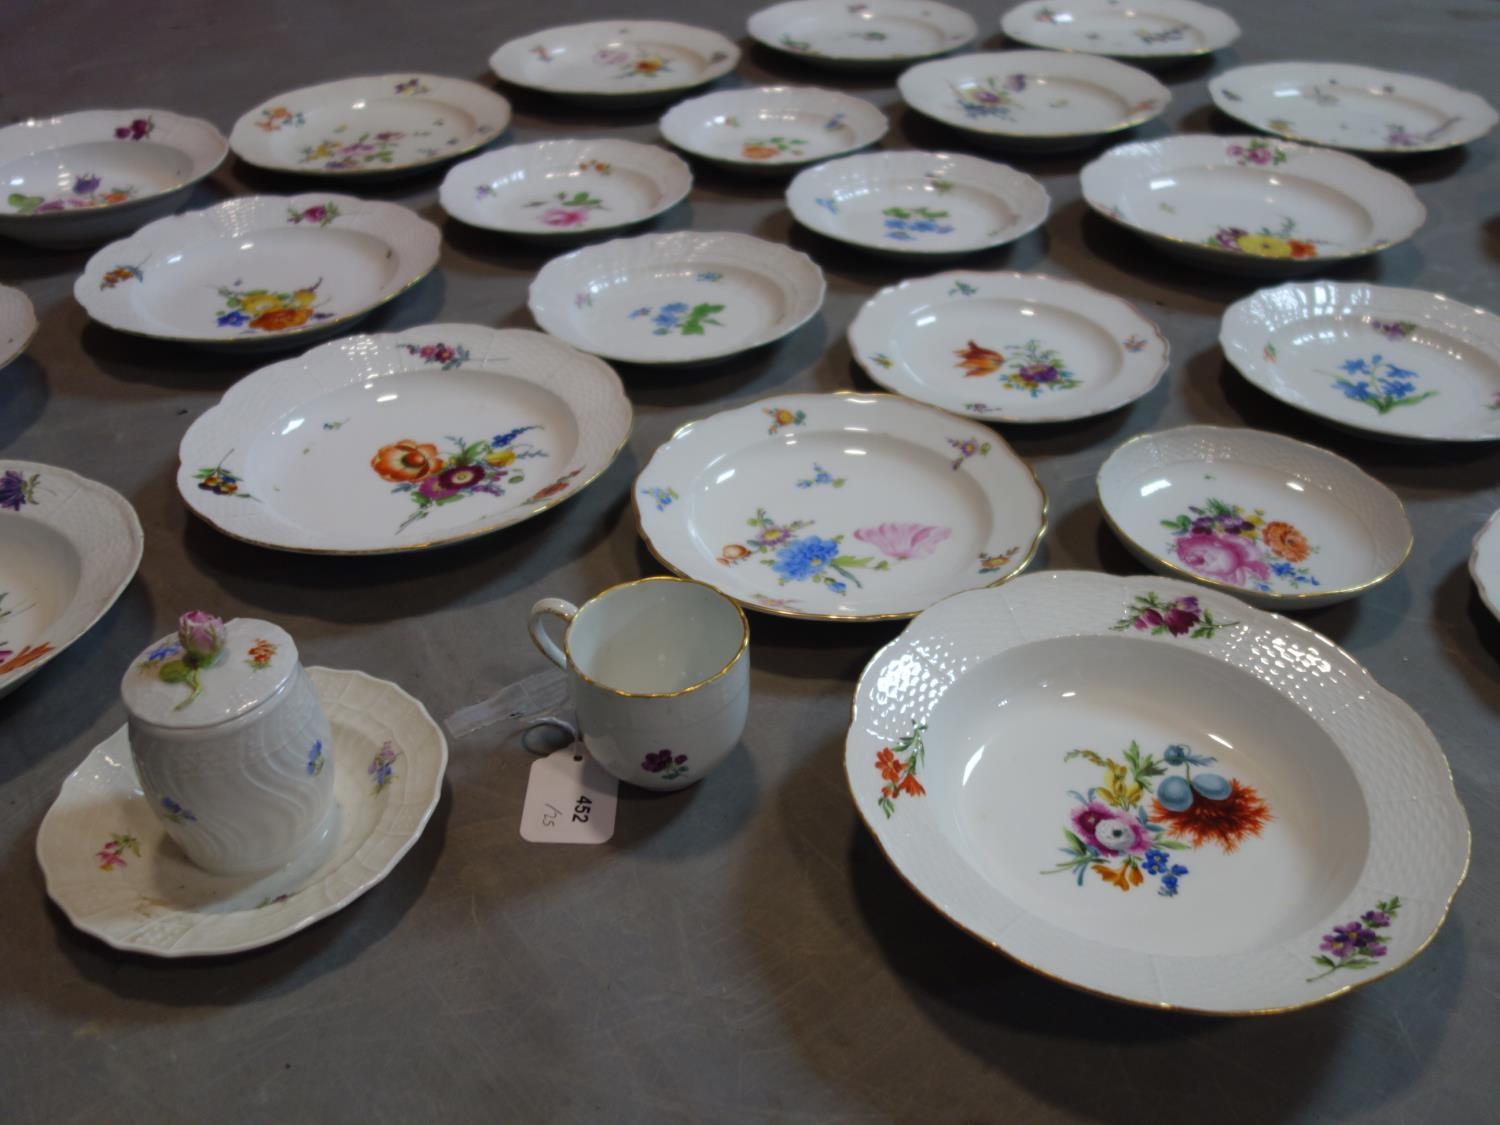 A collection of Meissen porcelain to include 23 plates, a cup and a sugar pot - Image 3 of 5